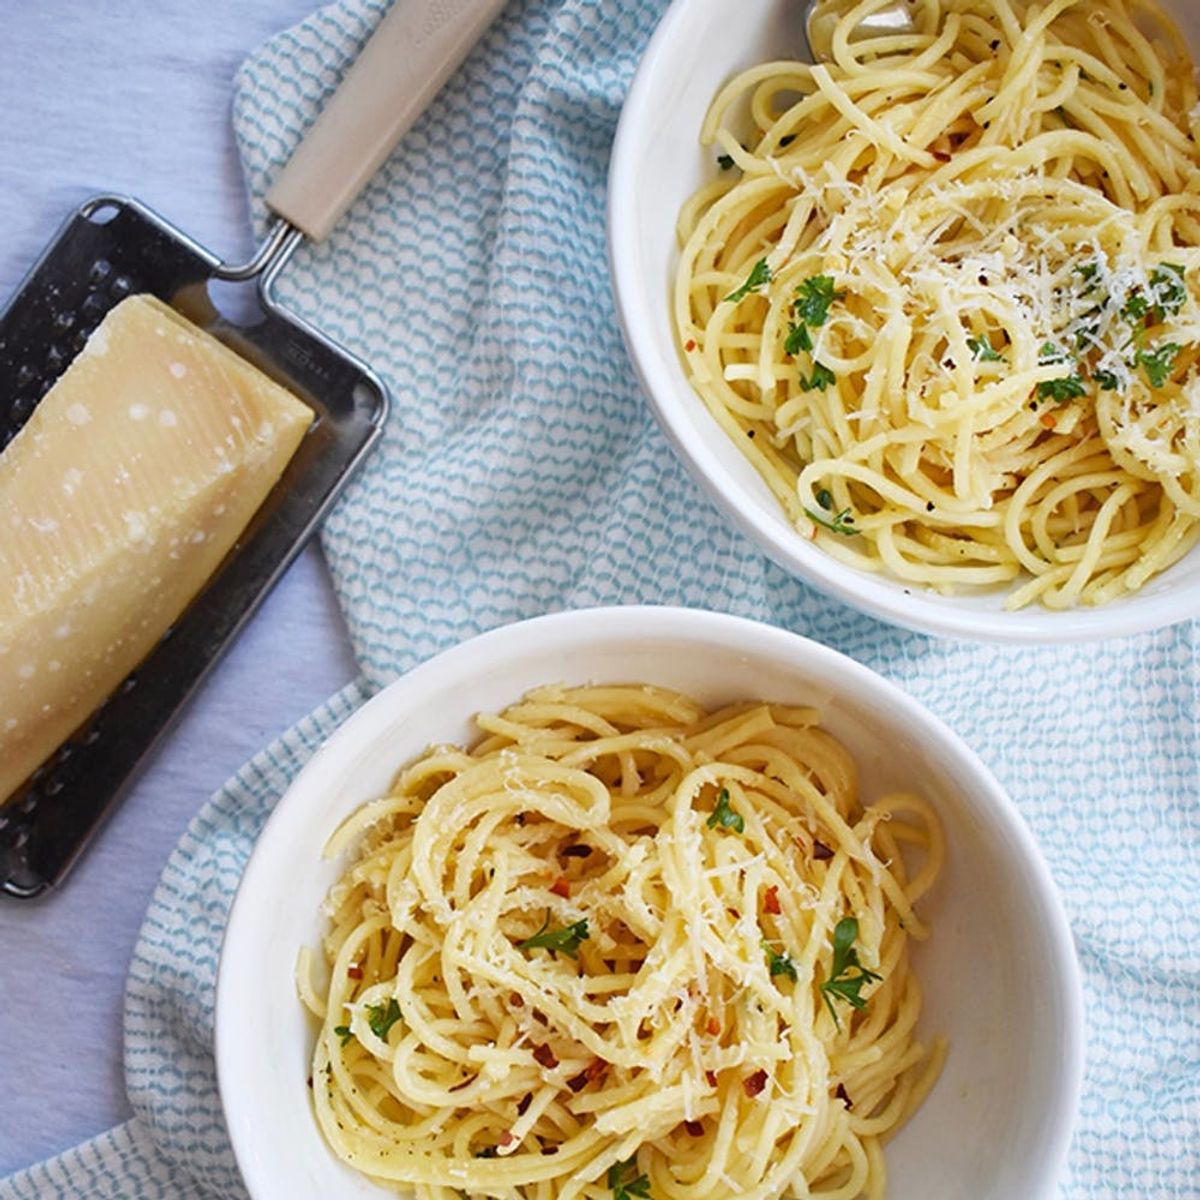 A Cheesy, Garlicky Weeknight Pasta Recipe for When Your Fridge Is Barren